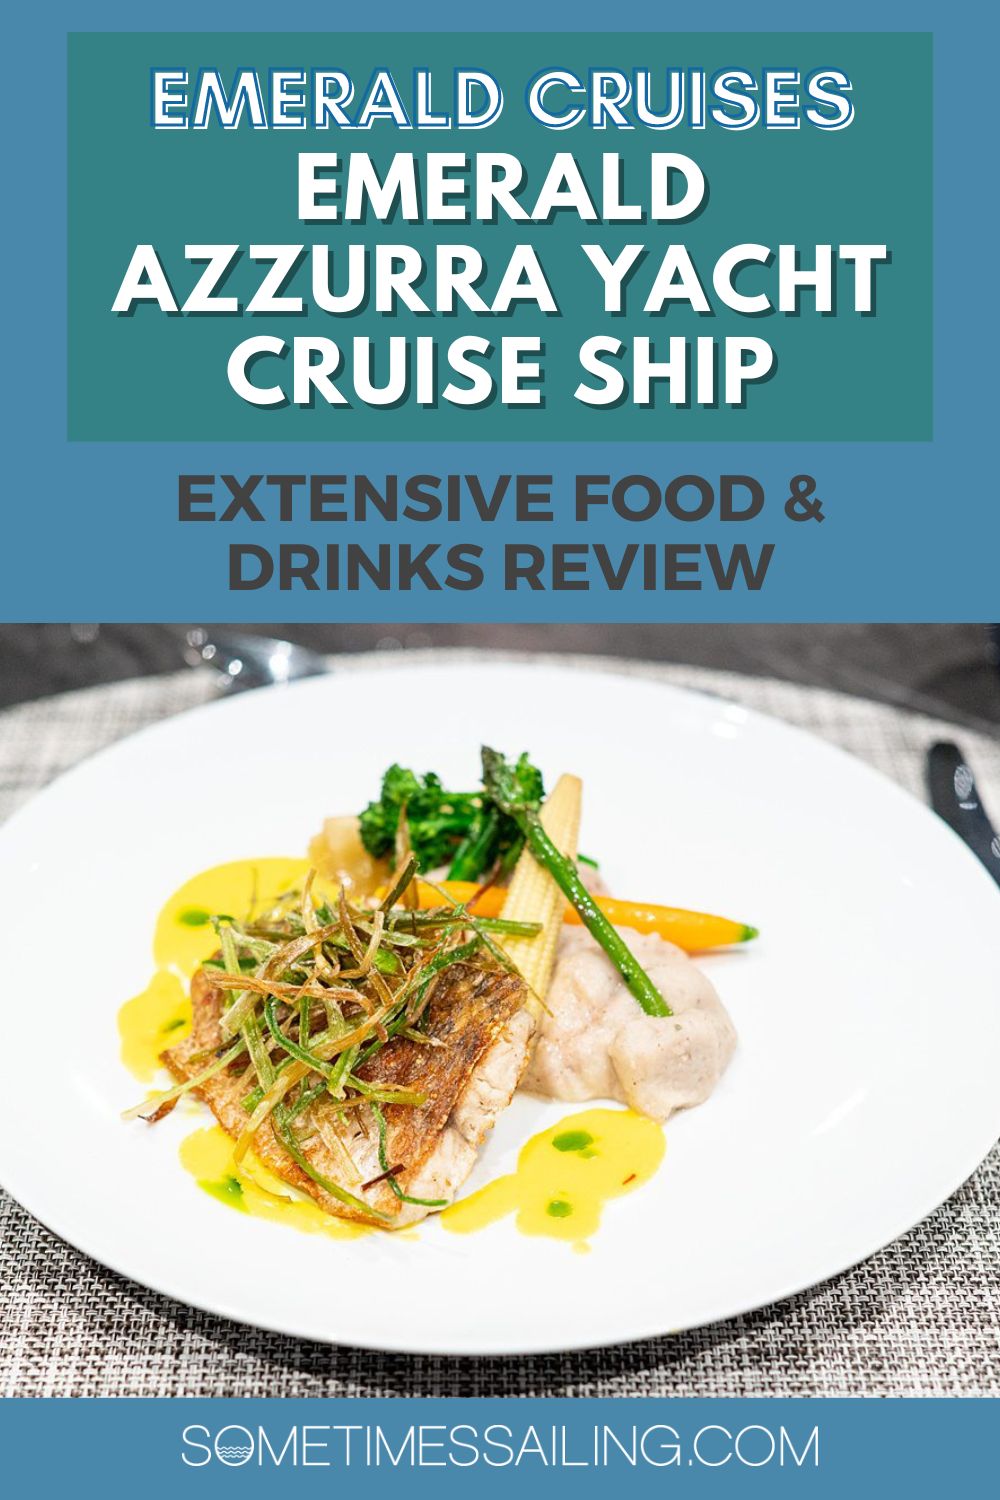 Emerald Azzurra yacht cruise ship: extensive food and drinks review, with a photo of a fish dish.